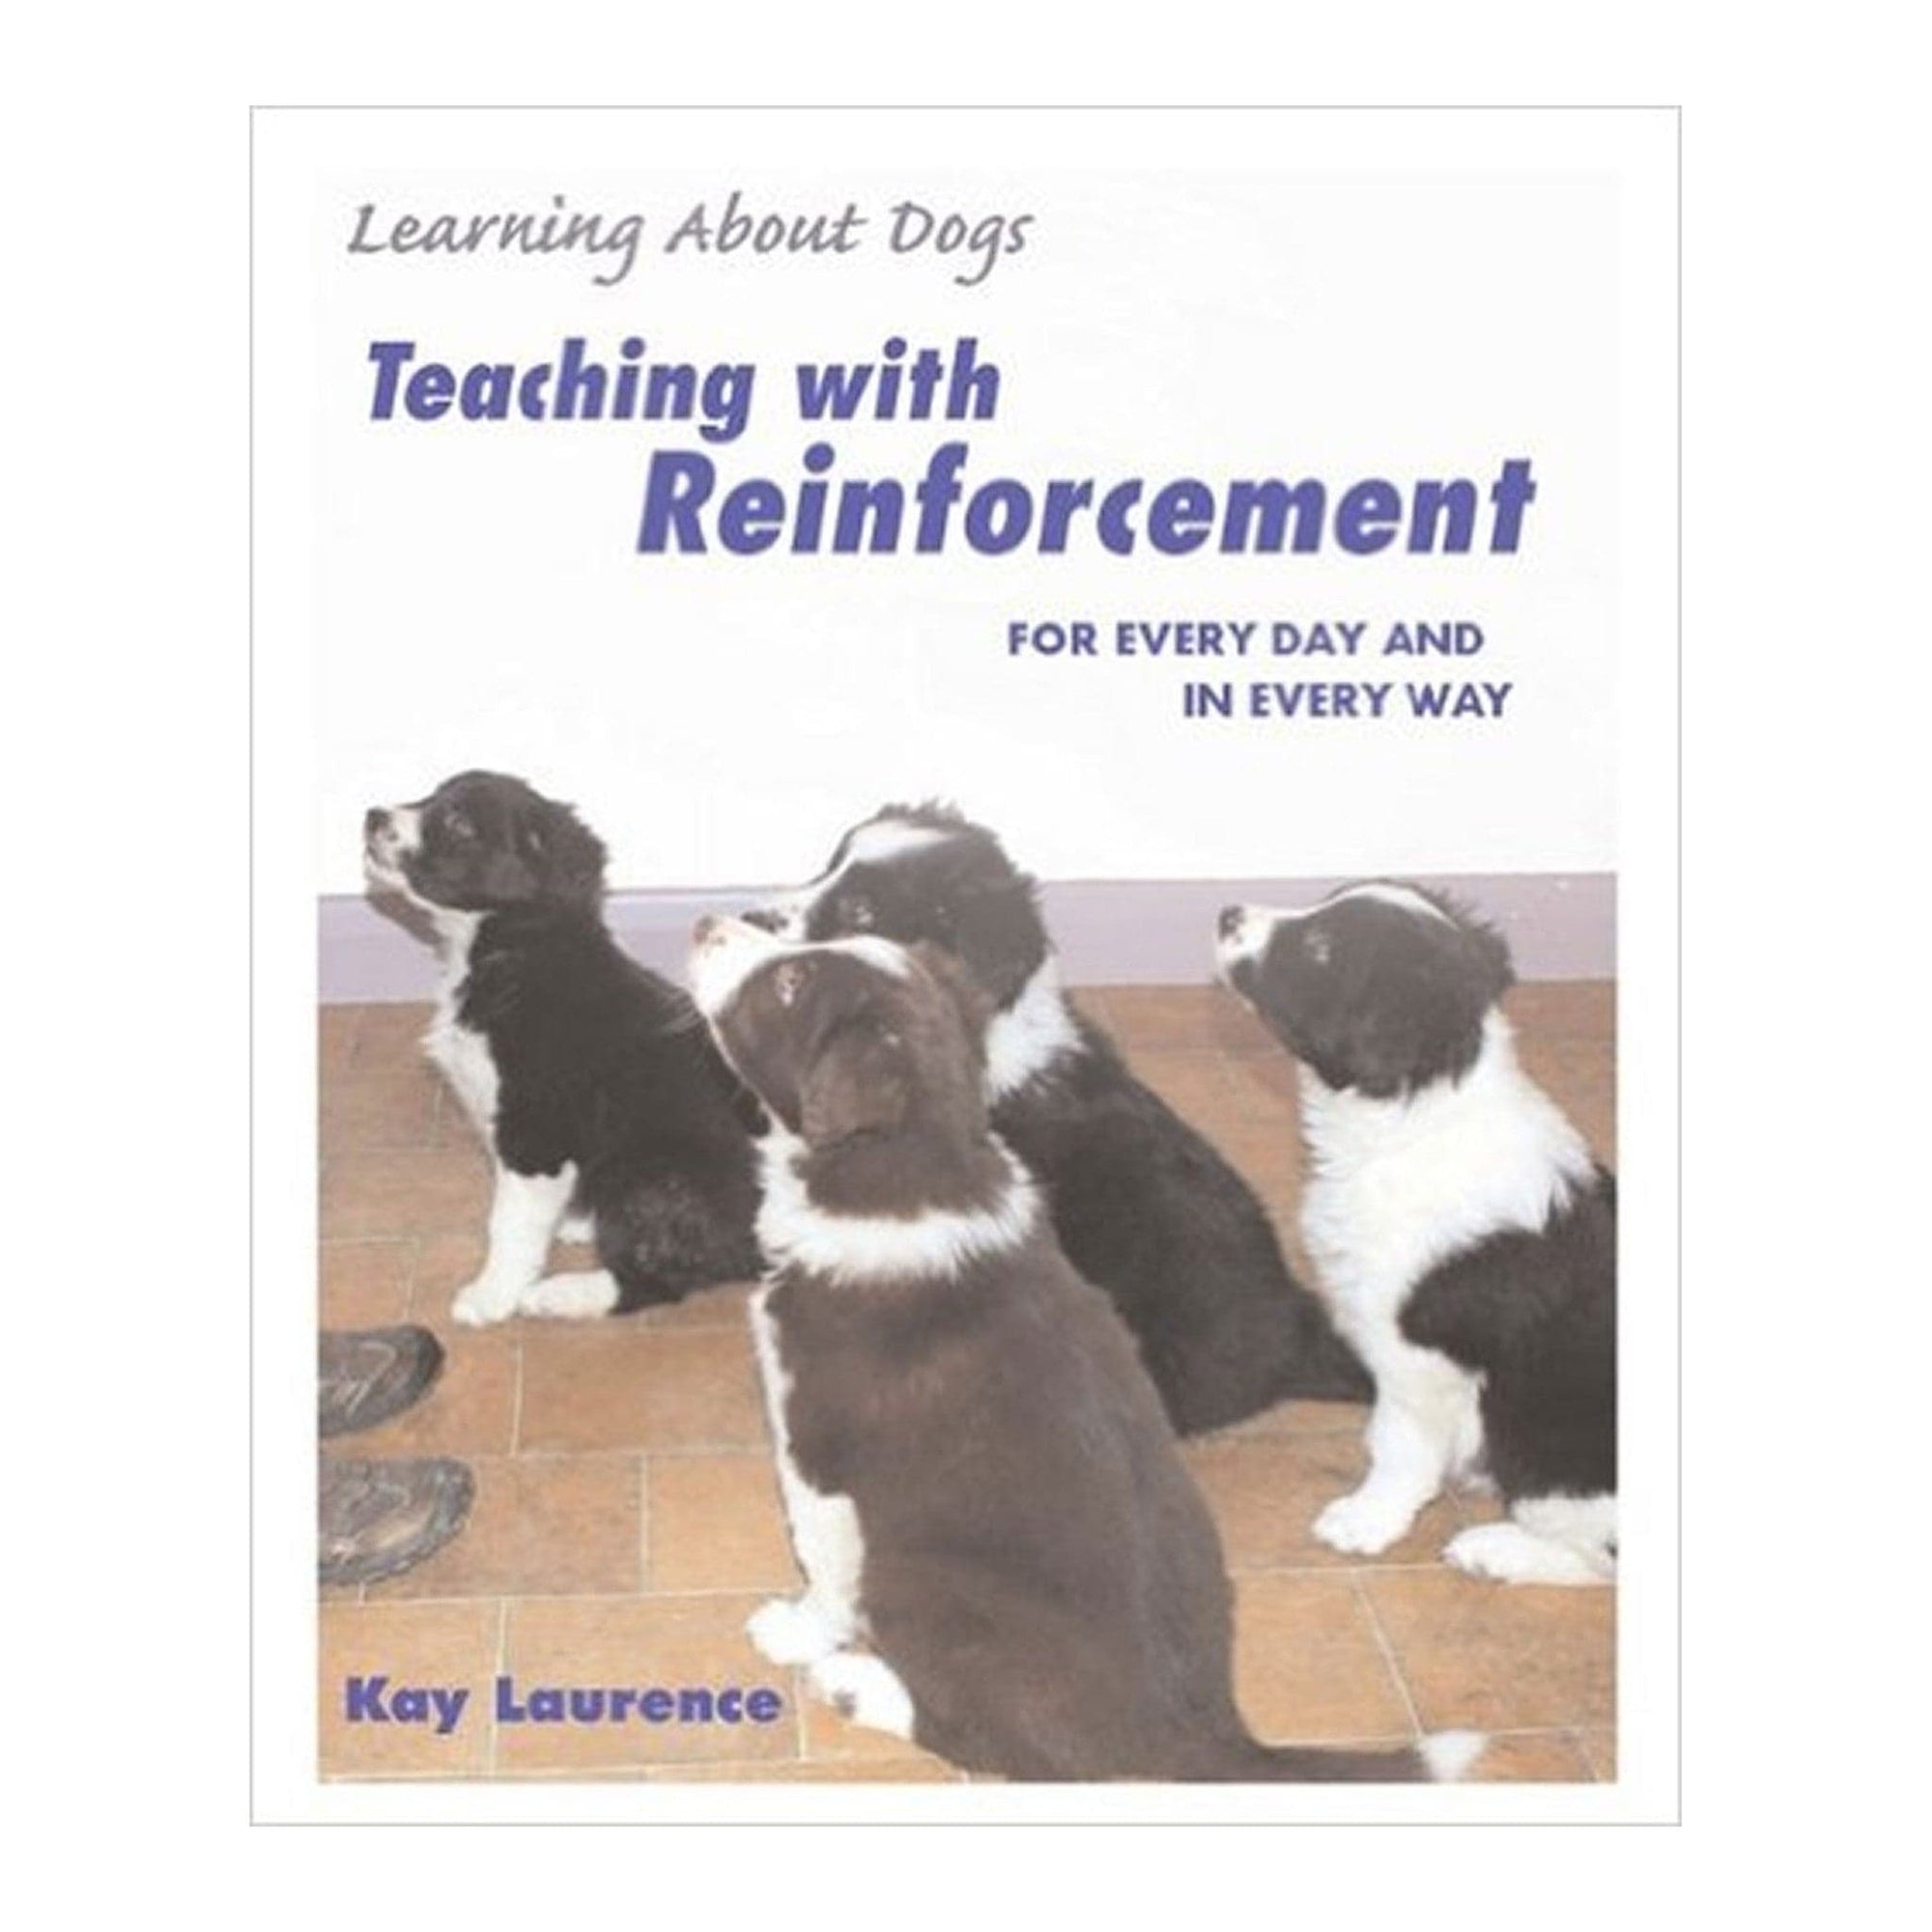 Teaching with Reinforcement by Kay Laurence